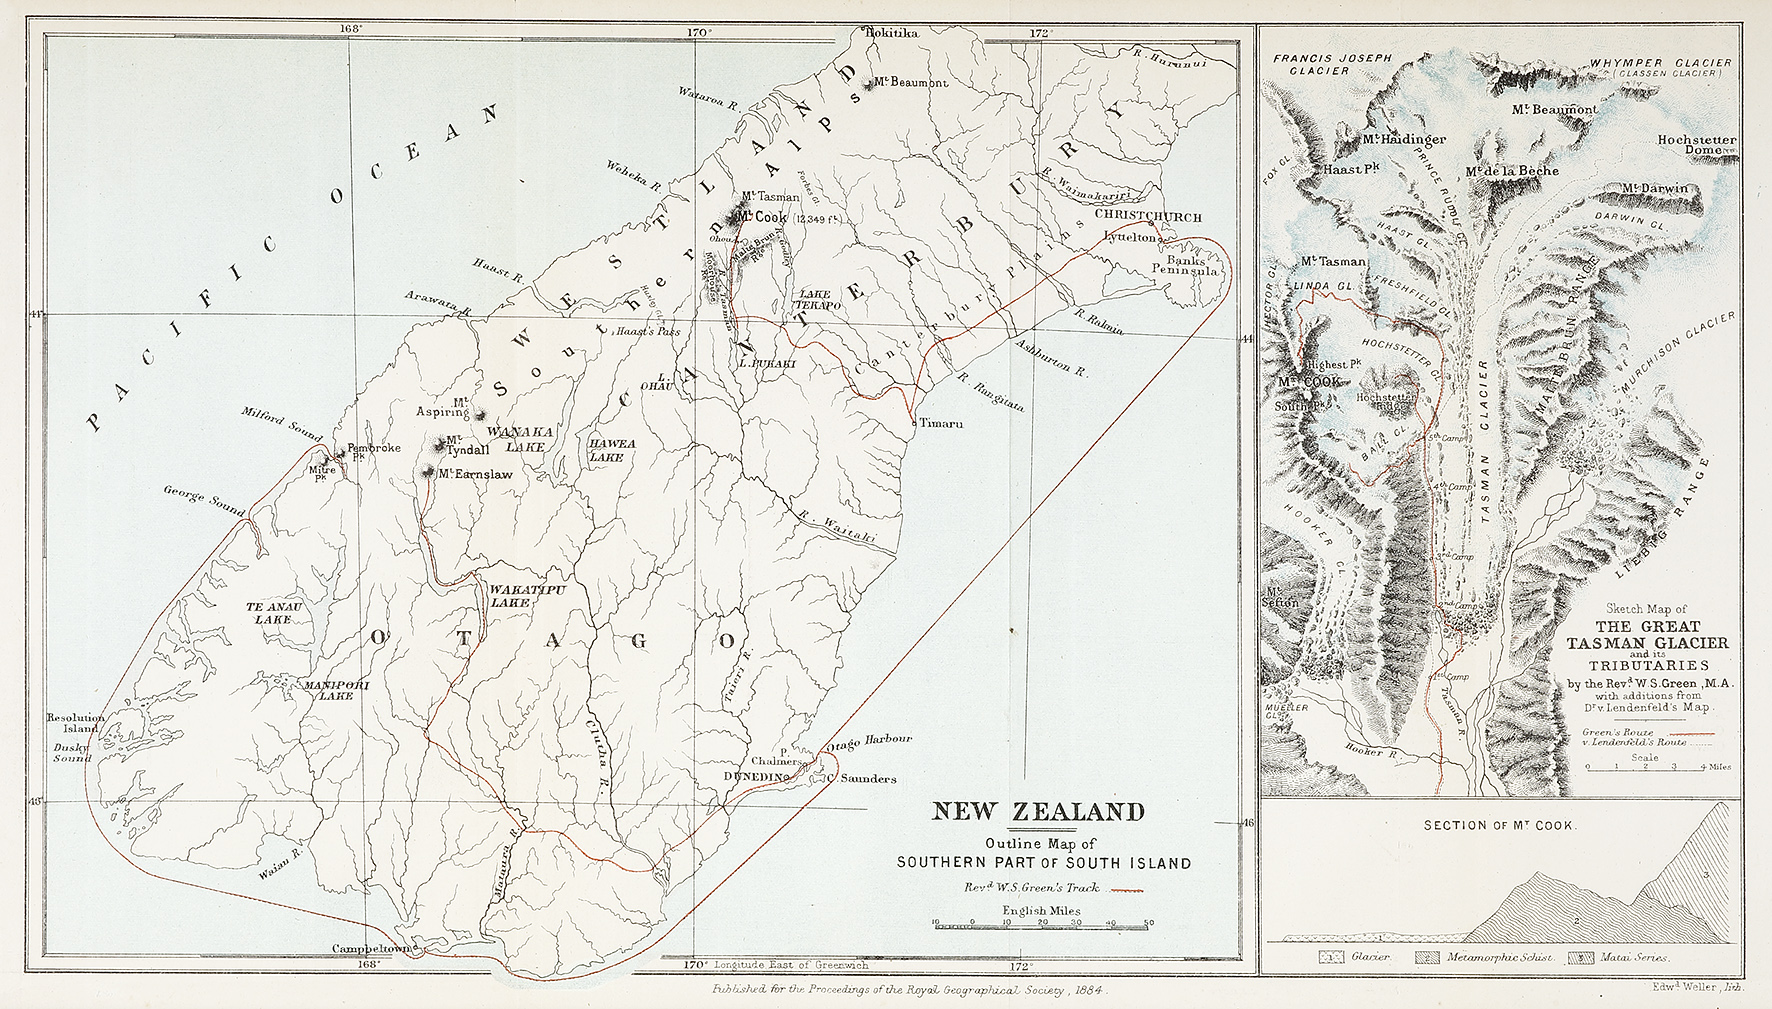 New Zealand. Outline Map of Southern Part of South Island. - Antique Map from 1884